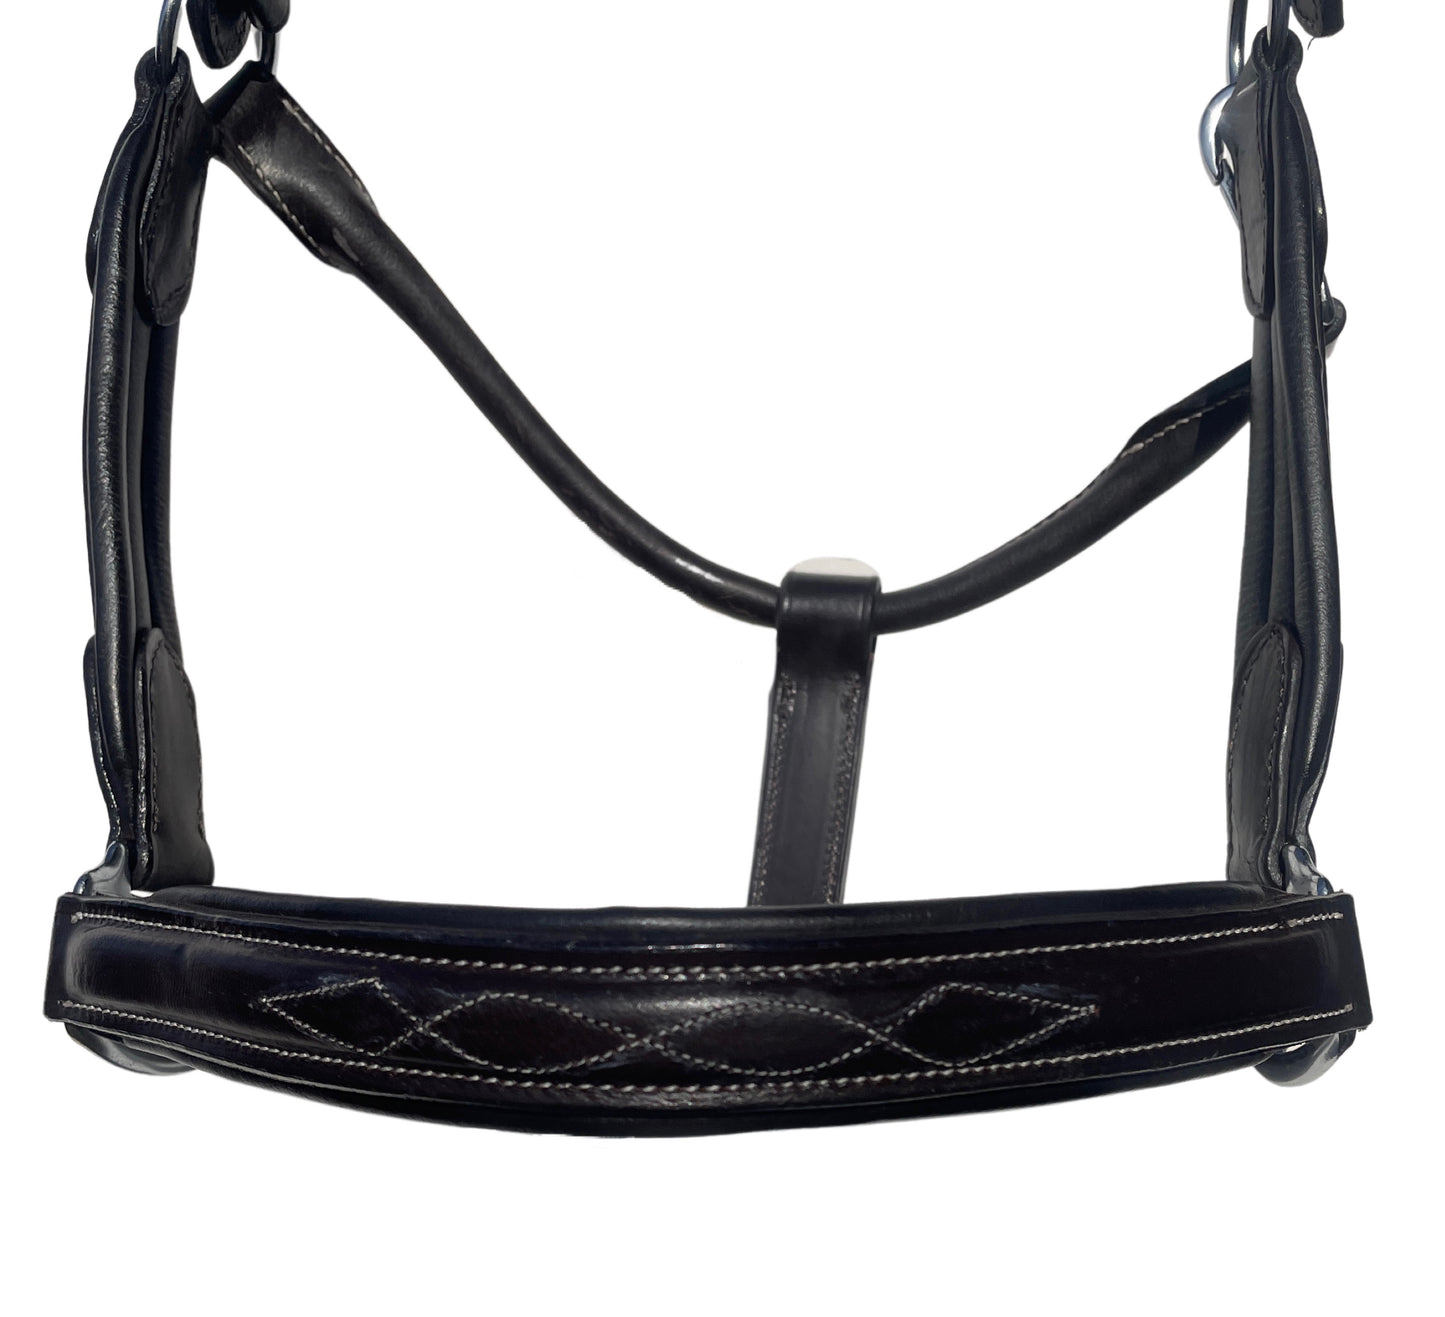 The Fancy Stitch Leather Halter